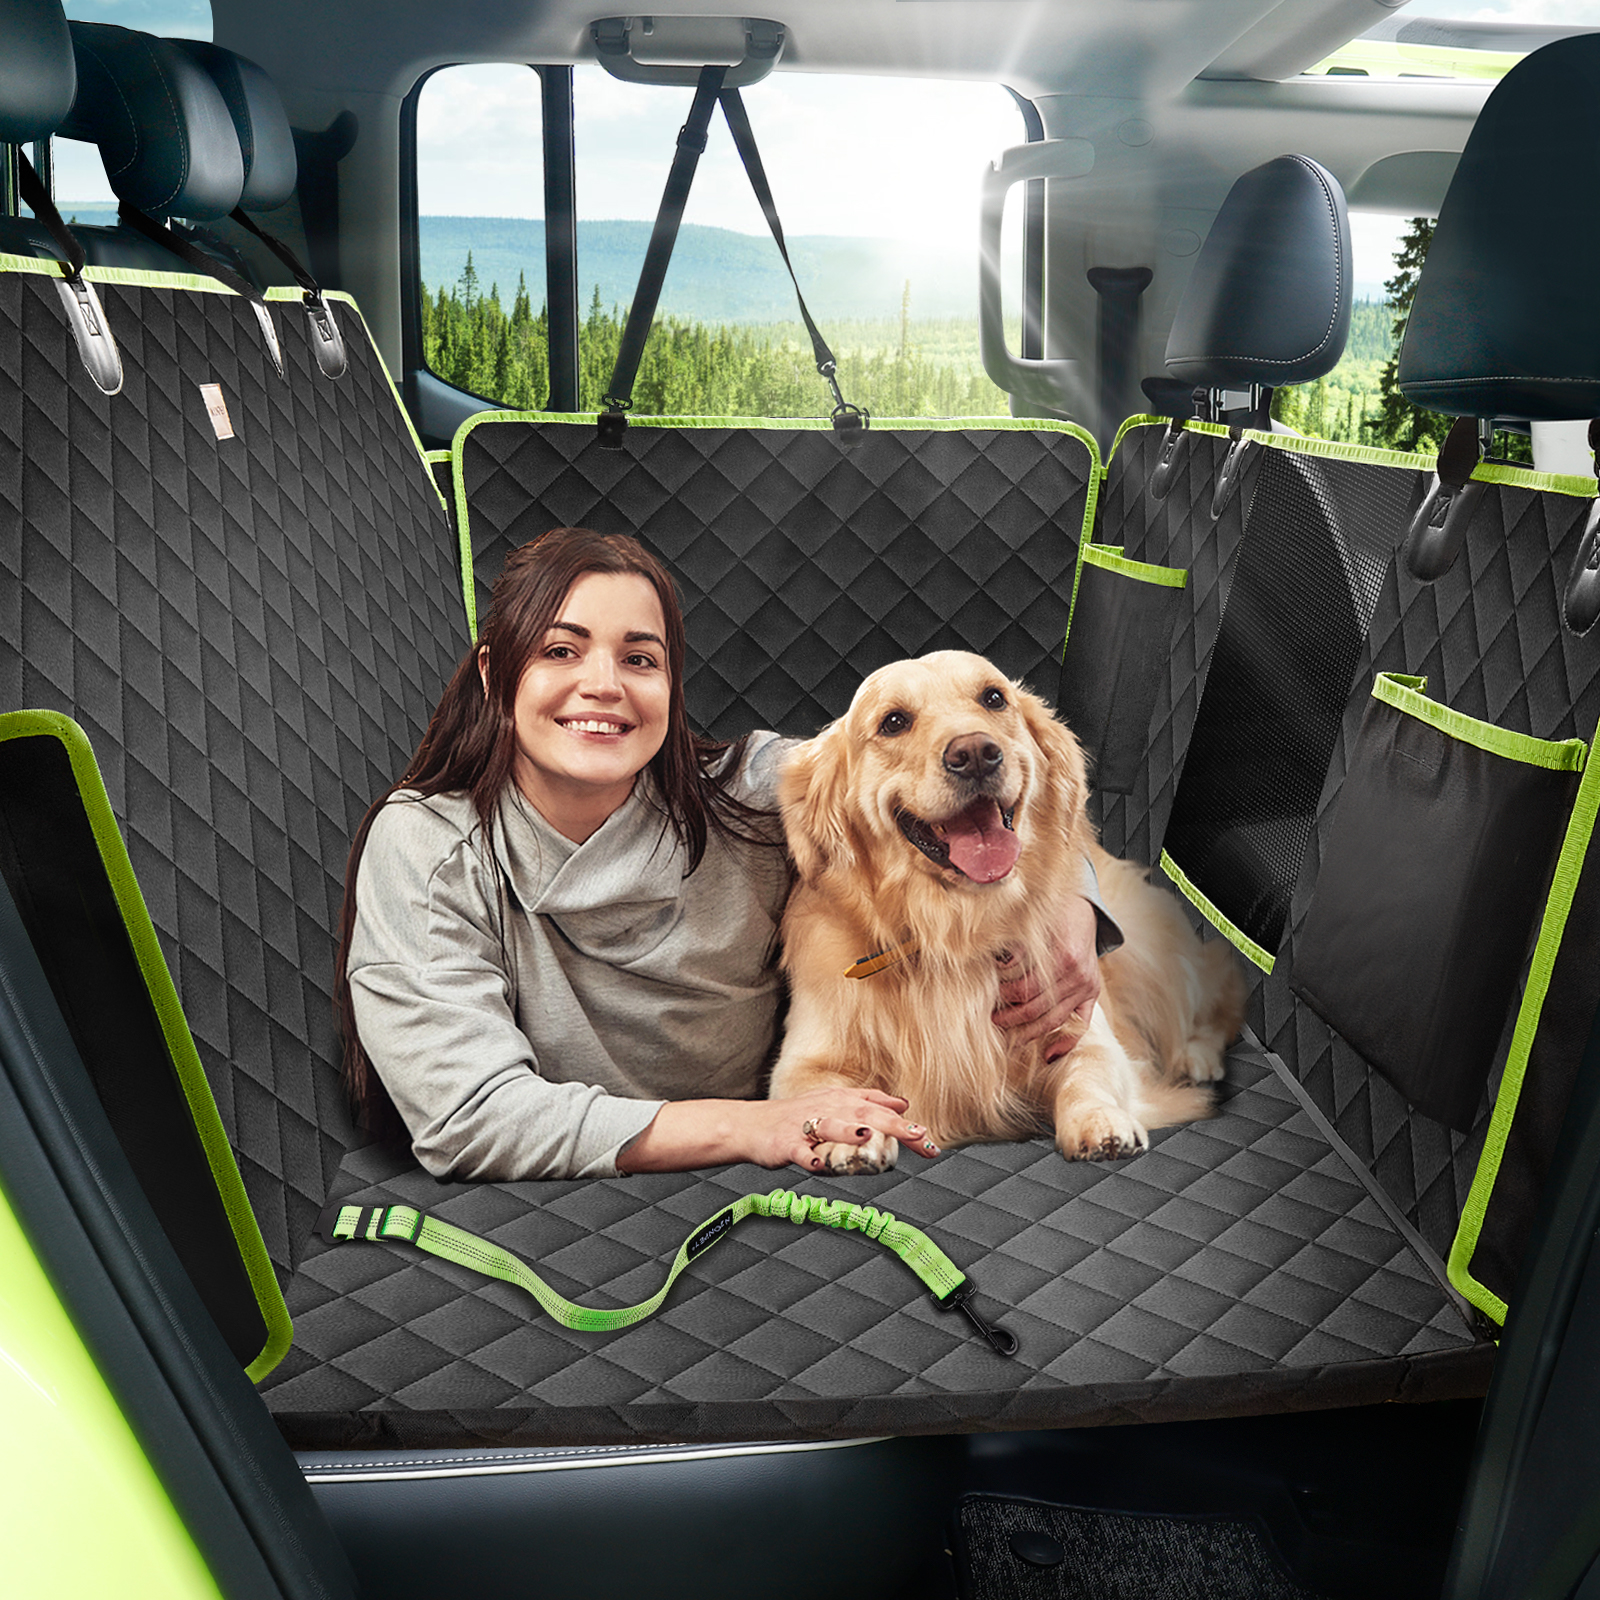 Dog Seat Cover for Back Seat - Nonslip Car Seat Protector for Dogs, 100%  Waterpr